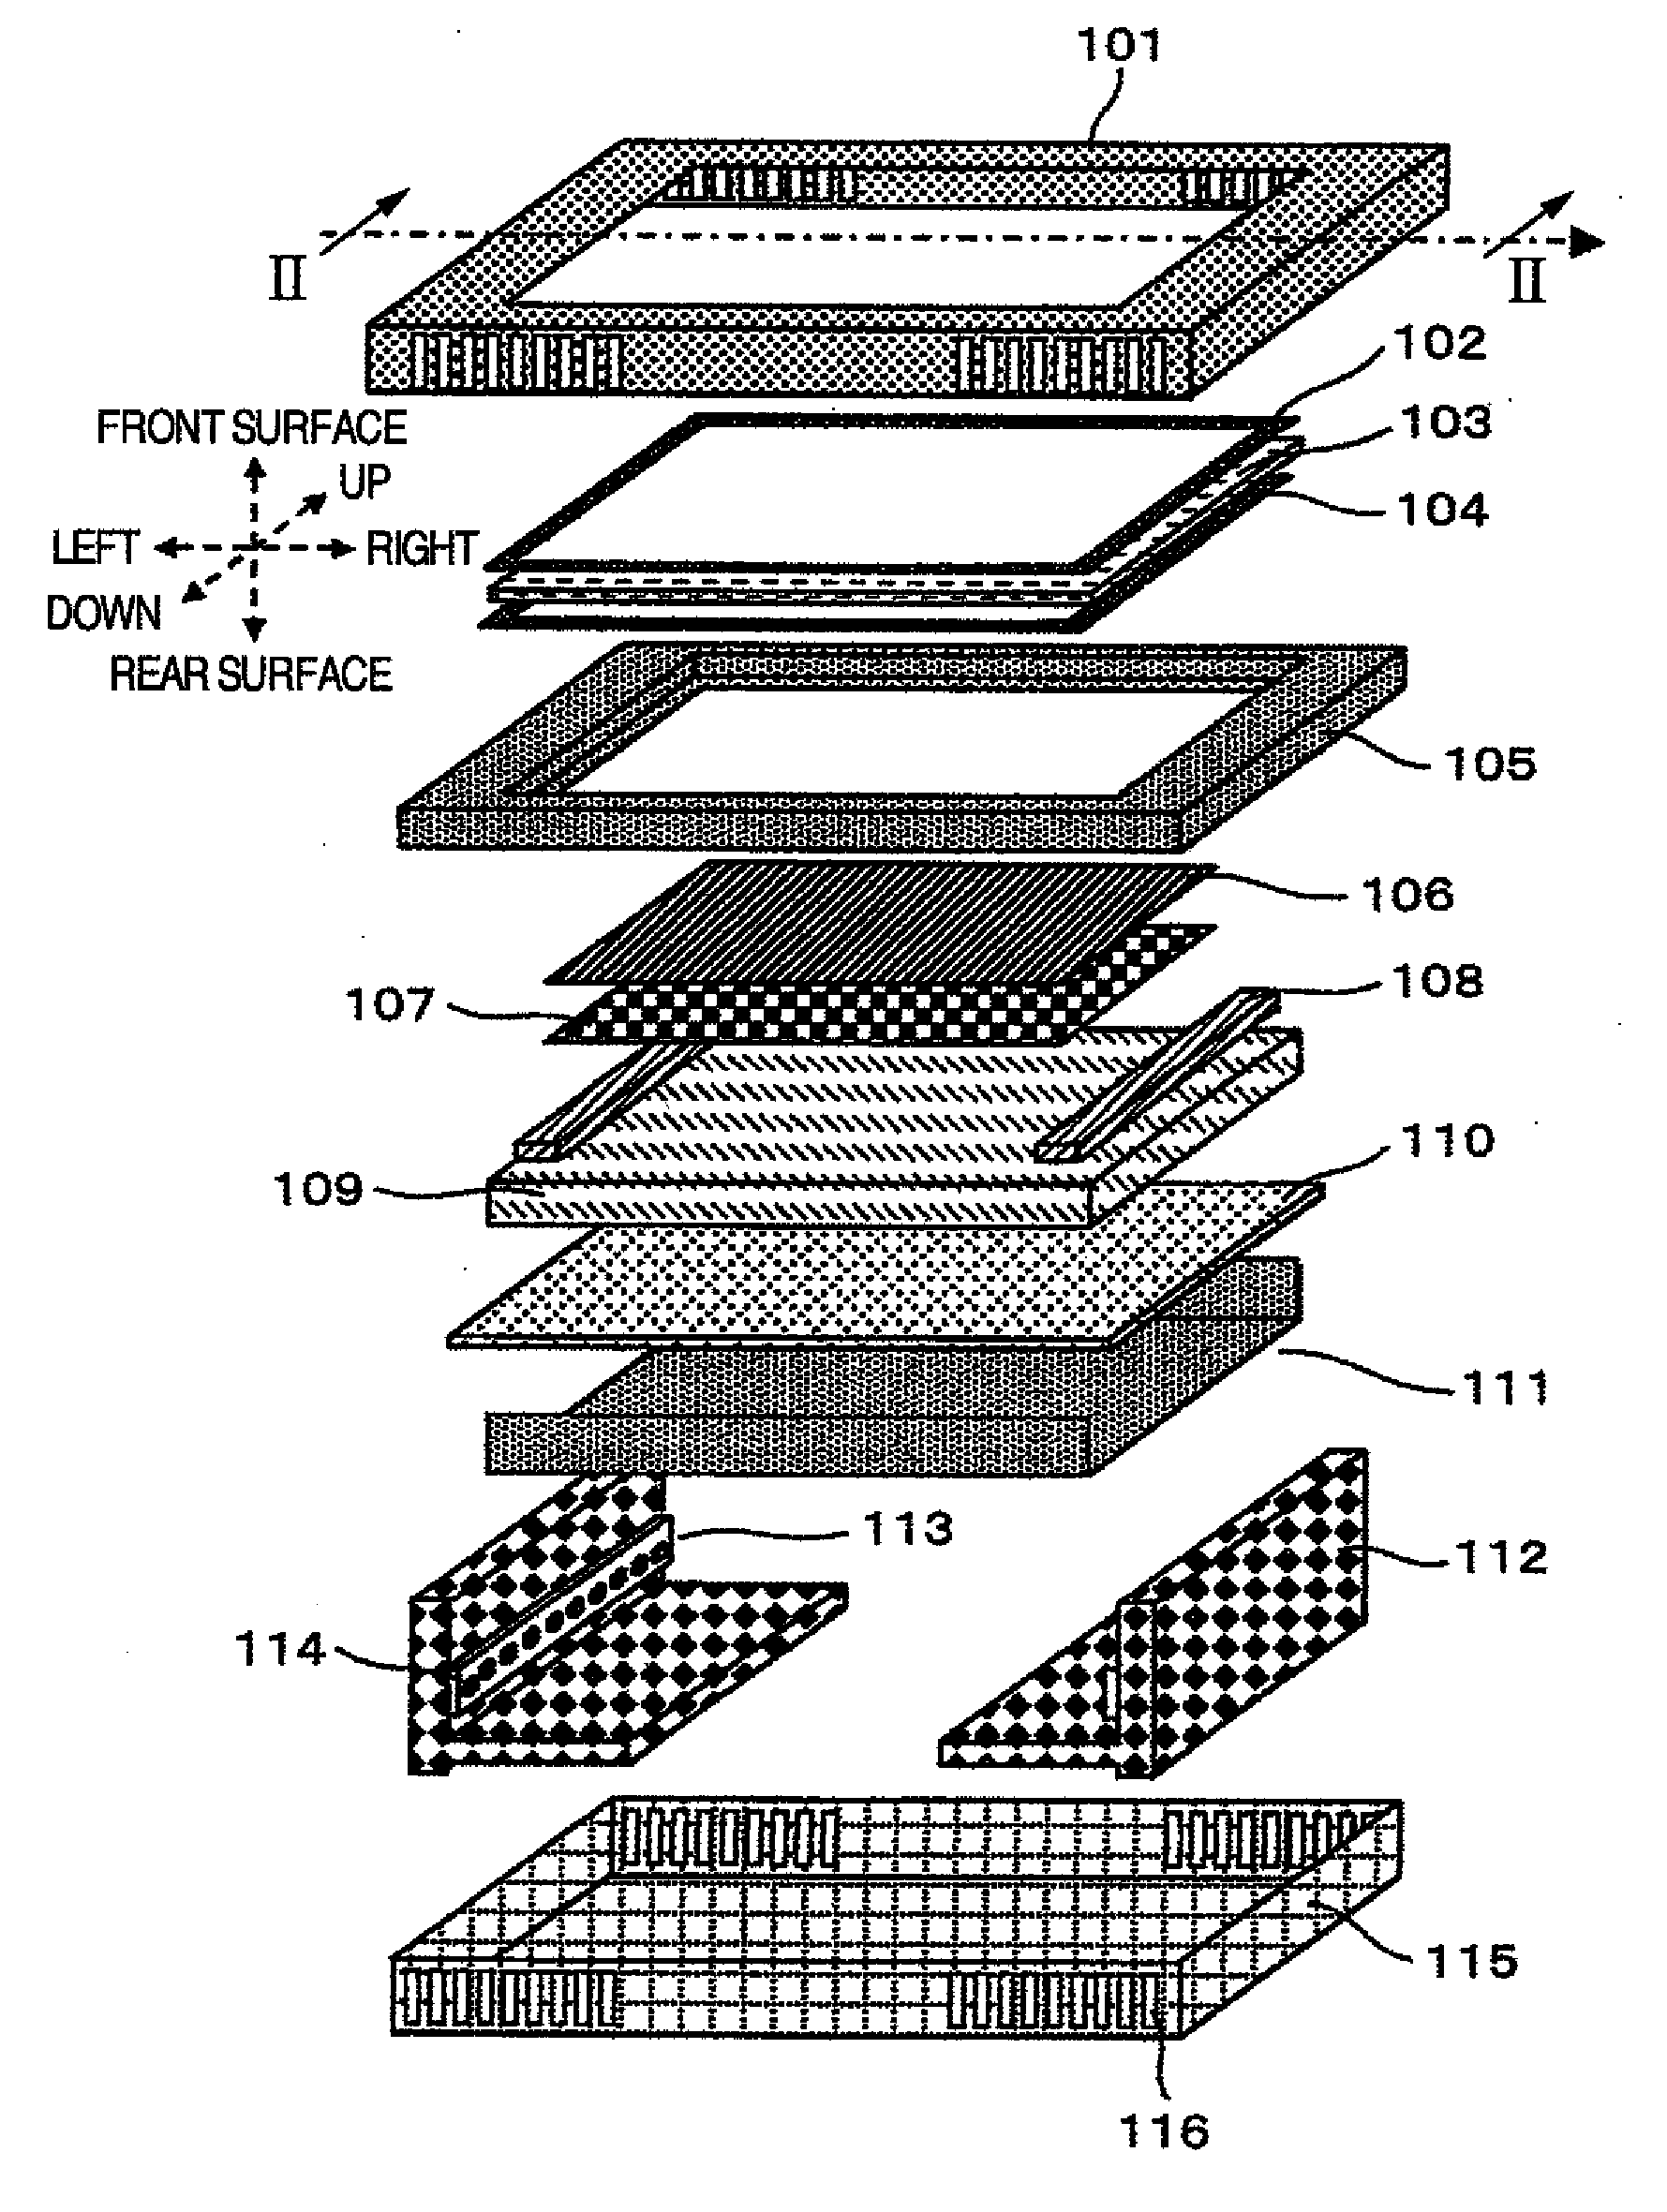 Liquid crystal display device and video display device using the same